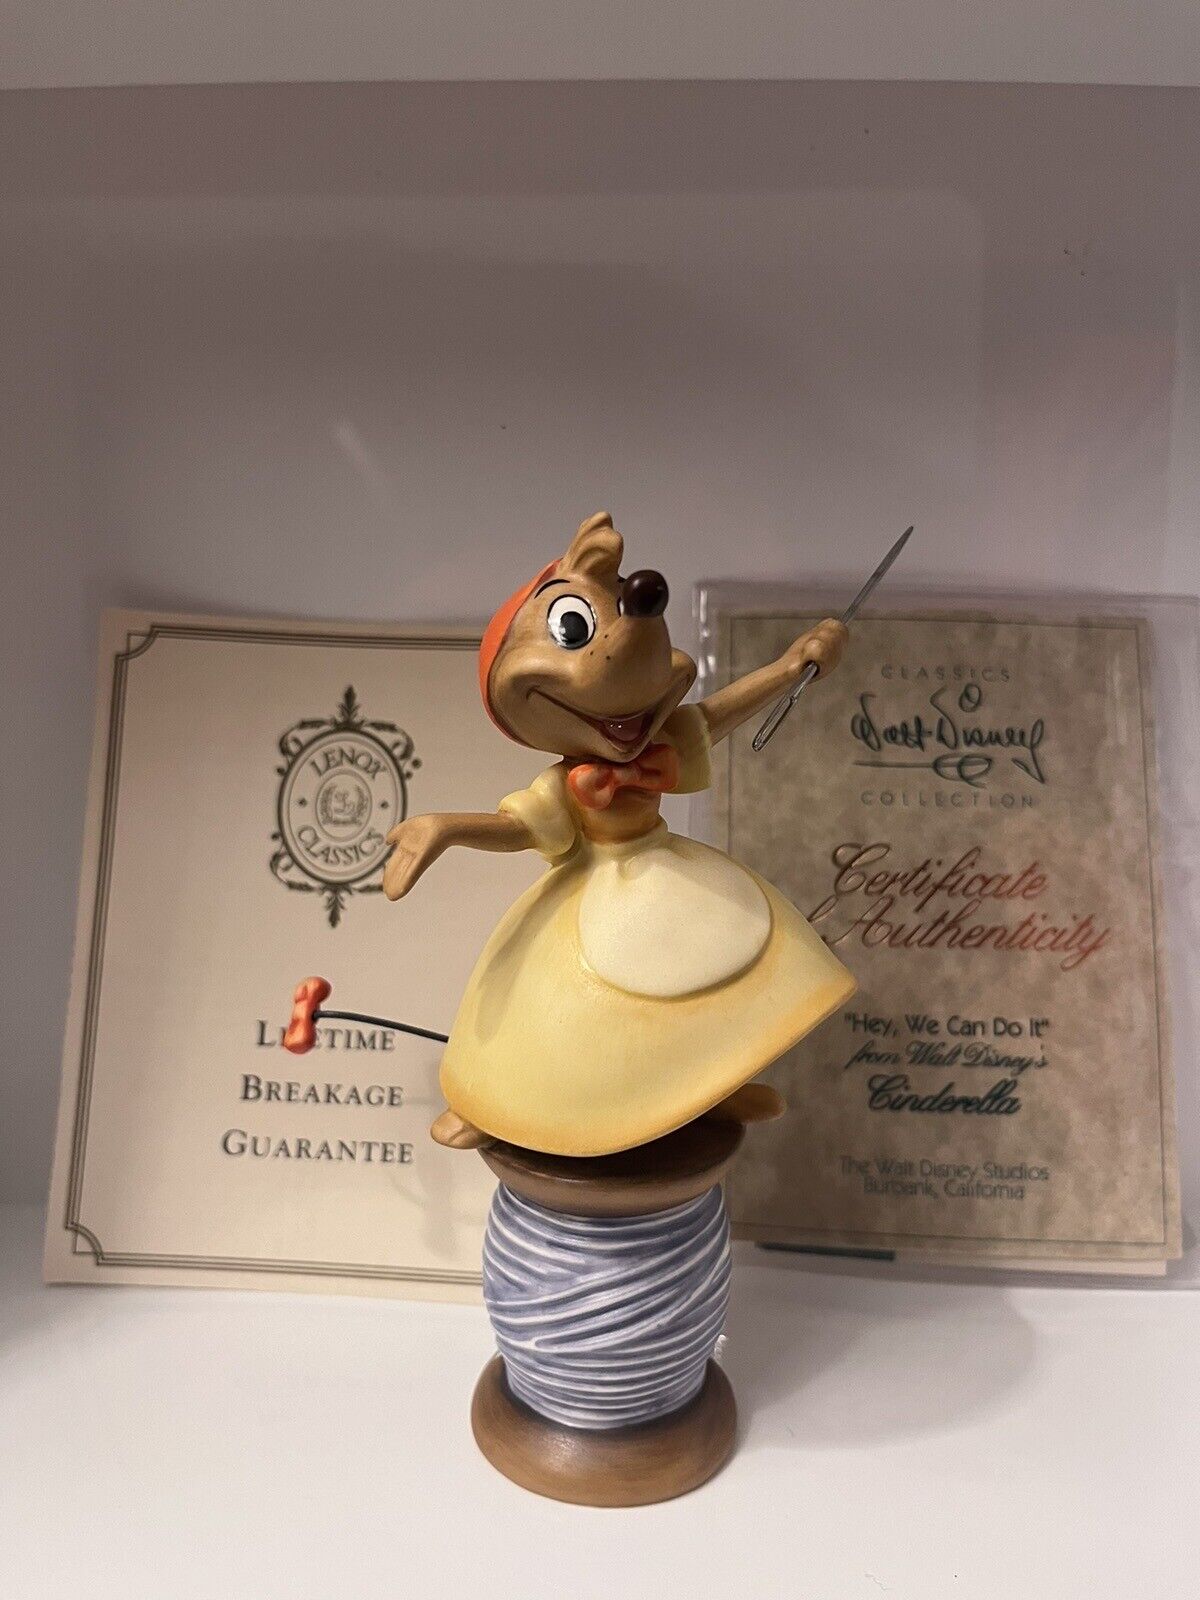 Cinderella Needle Mouse (Suzy) Hey We Can Do It -Walt Disney Classics Collection